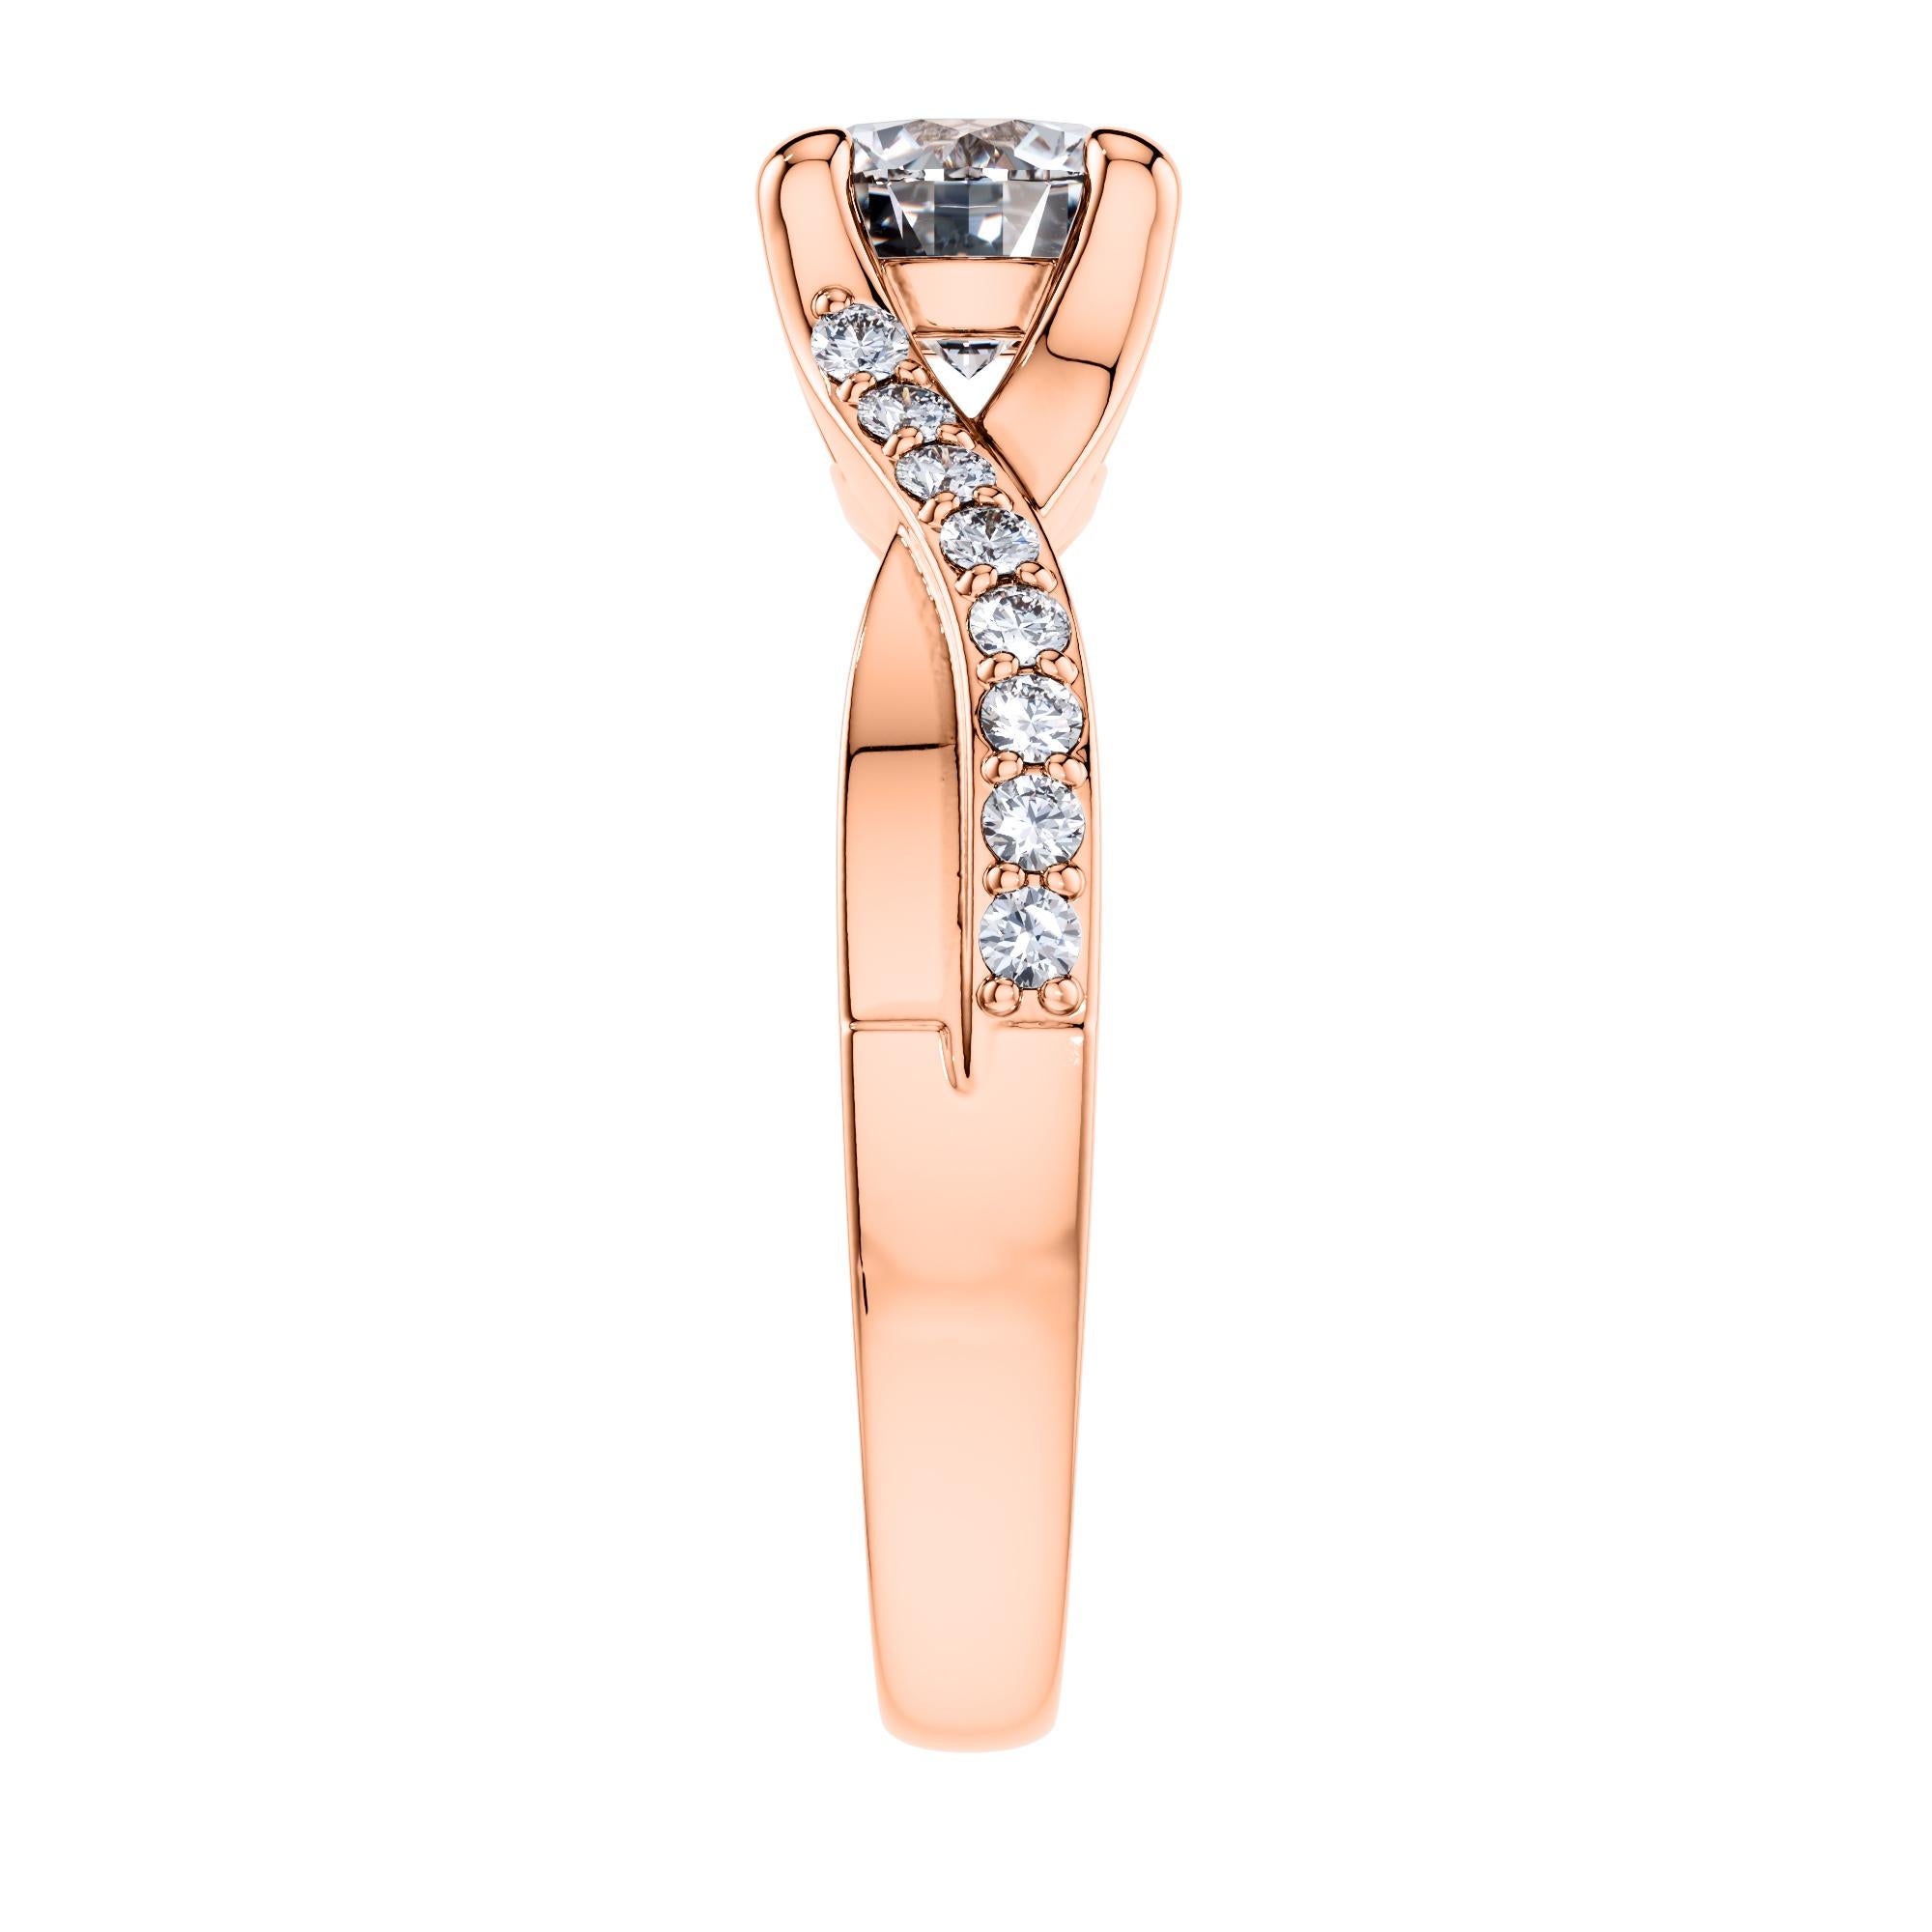 For a beautifully entwined journey together, this gleaming twisted vine modern classic engagement ring. Handmade in 18 Karat Rose Gold, with a total of 0.95 Carat White Diamond. Set in an open gallery 4 prong mount with a split shank that has one